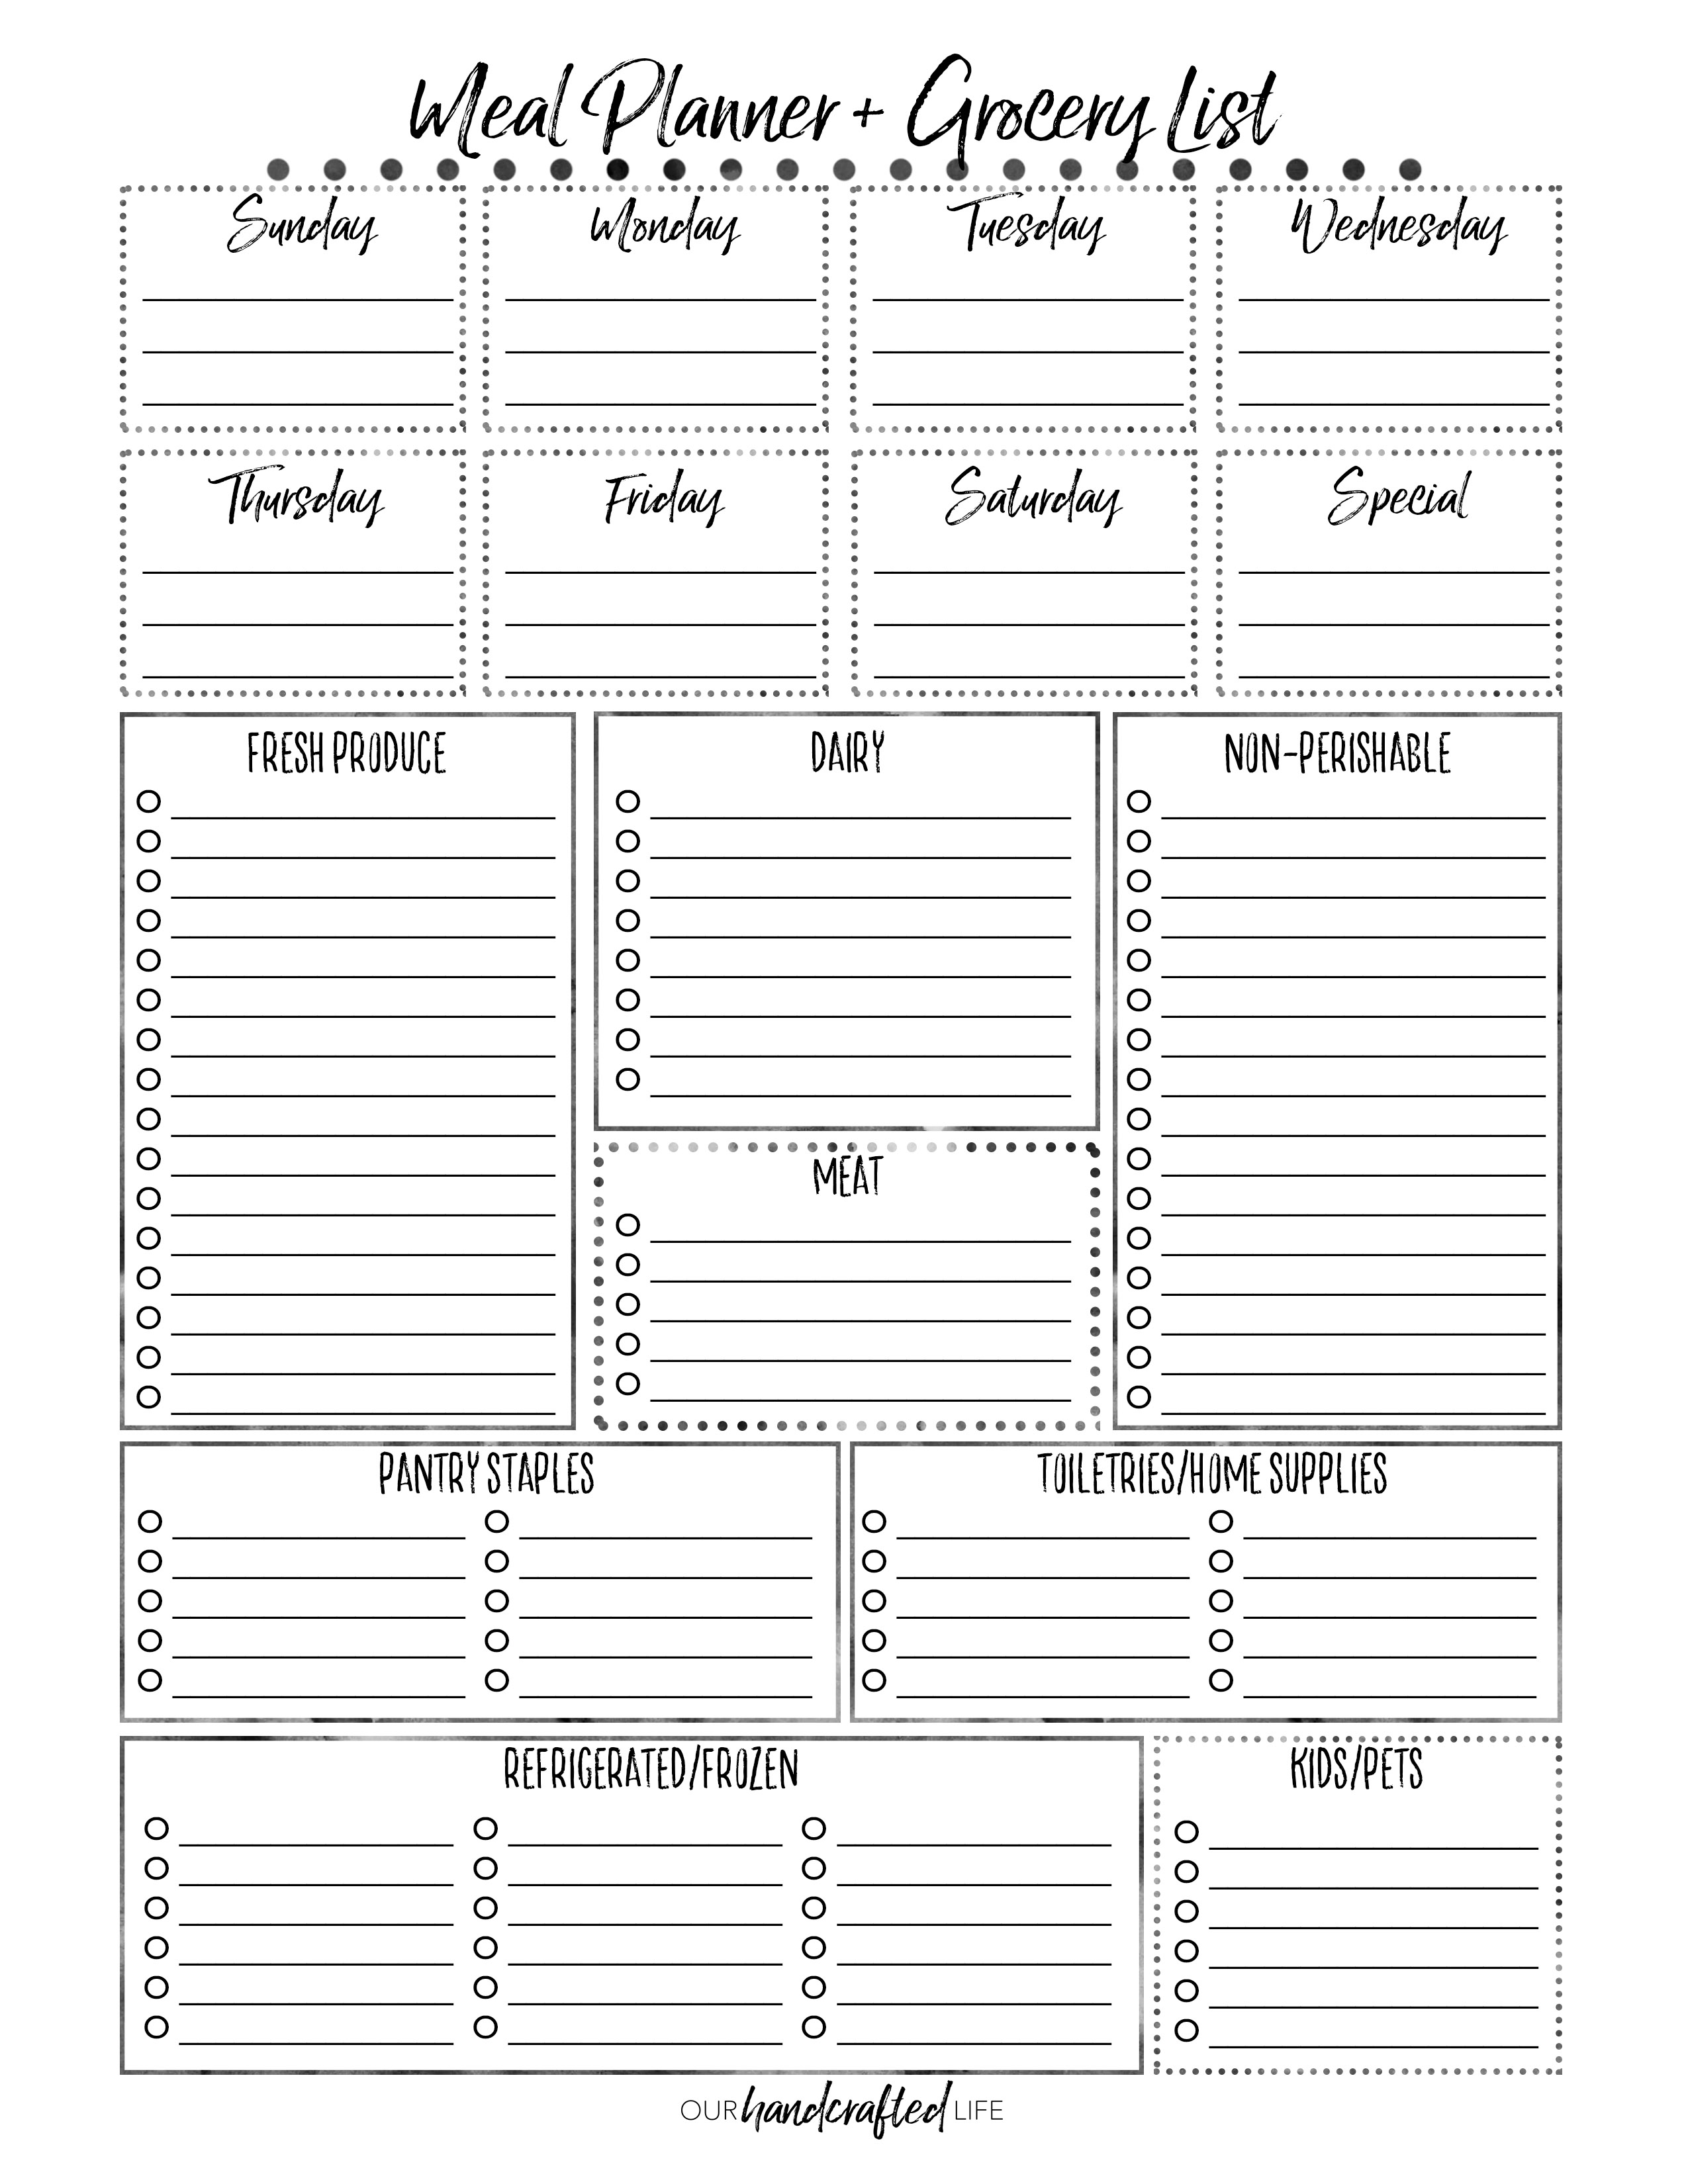 The Most Practical Meal Planner EVER - Our Handcrafted Life For Menu Planner With Grocery List Template